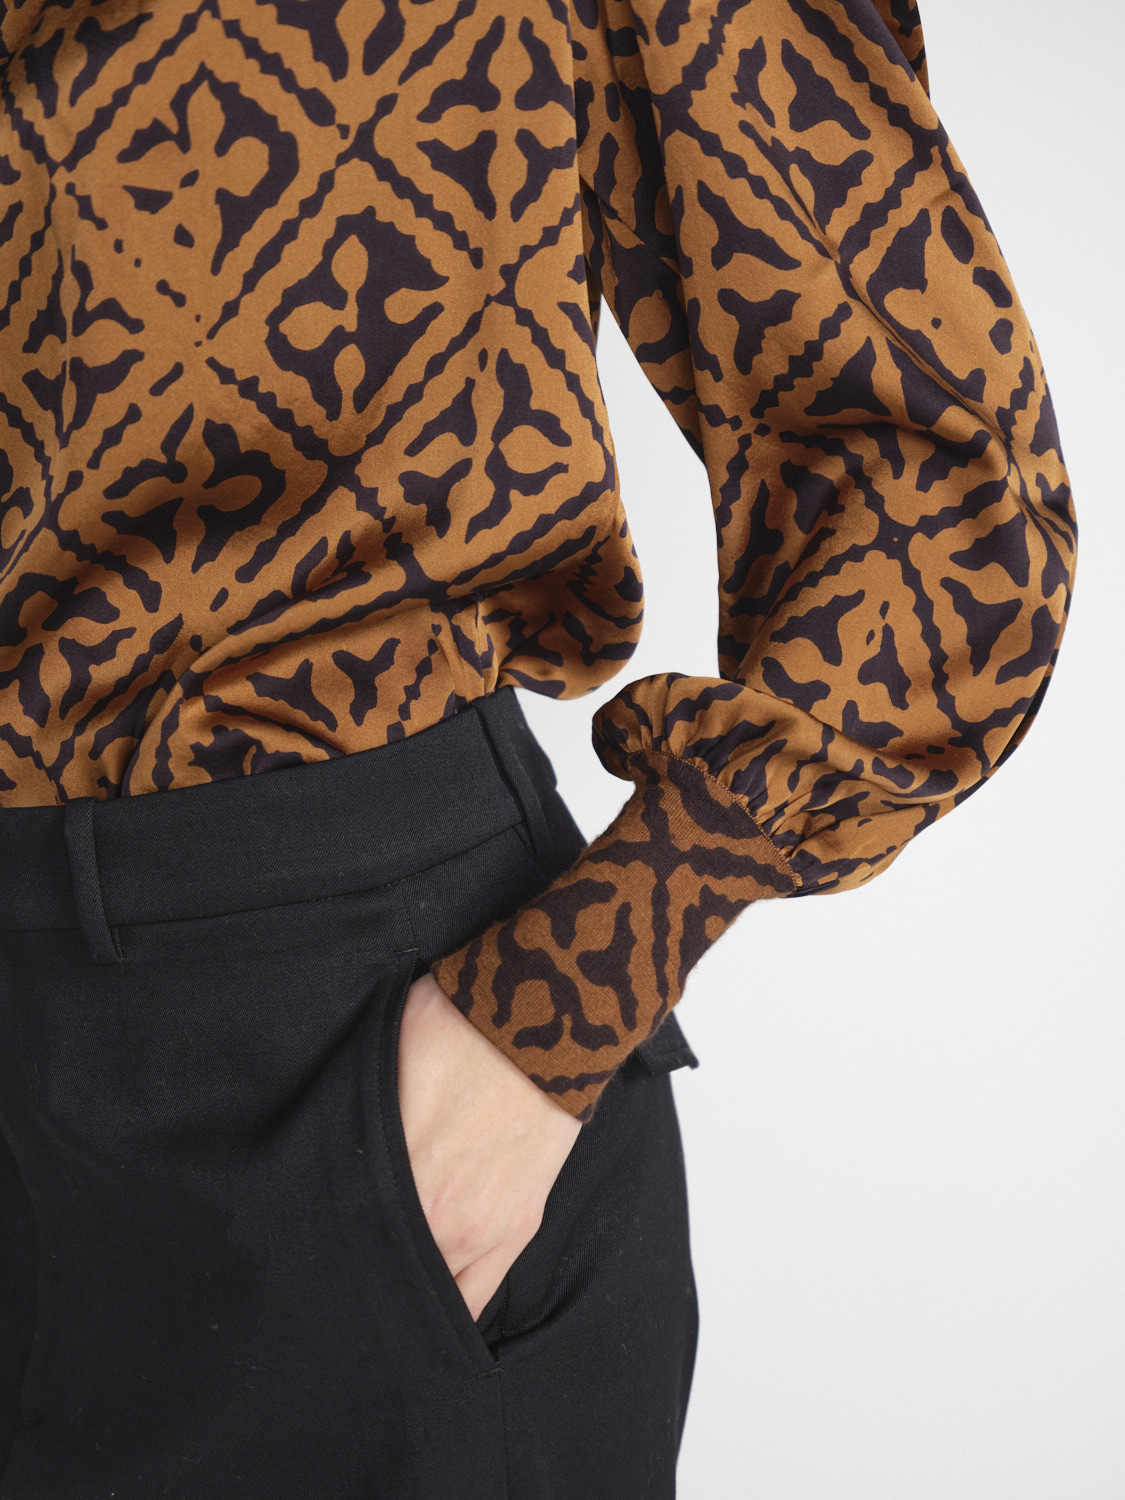 friendly hunting Call Eyes of Marrakesh - Silk blouse with ornamental print  multi M